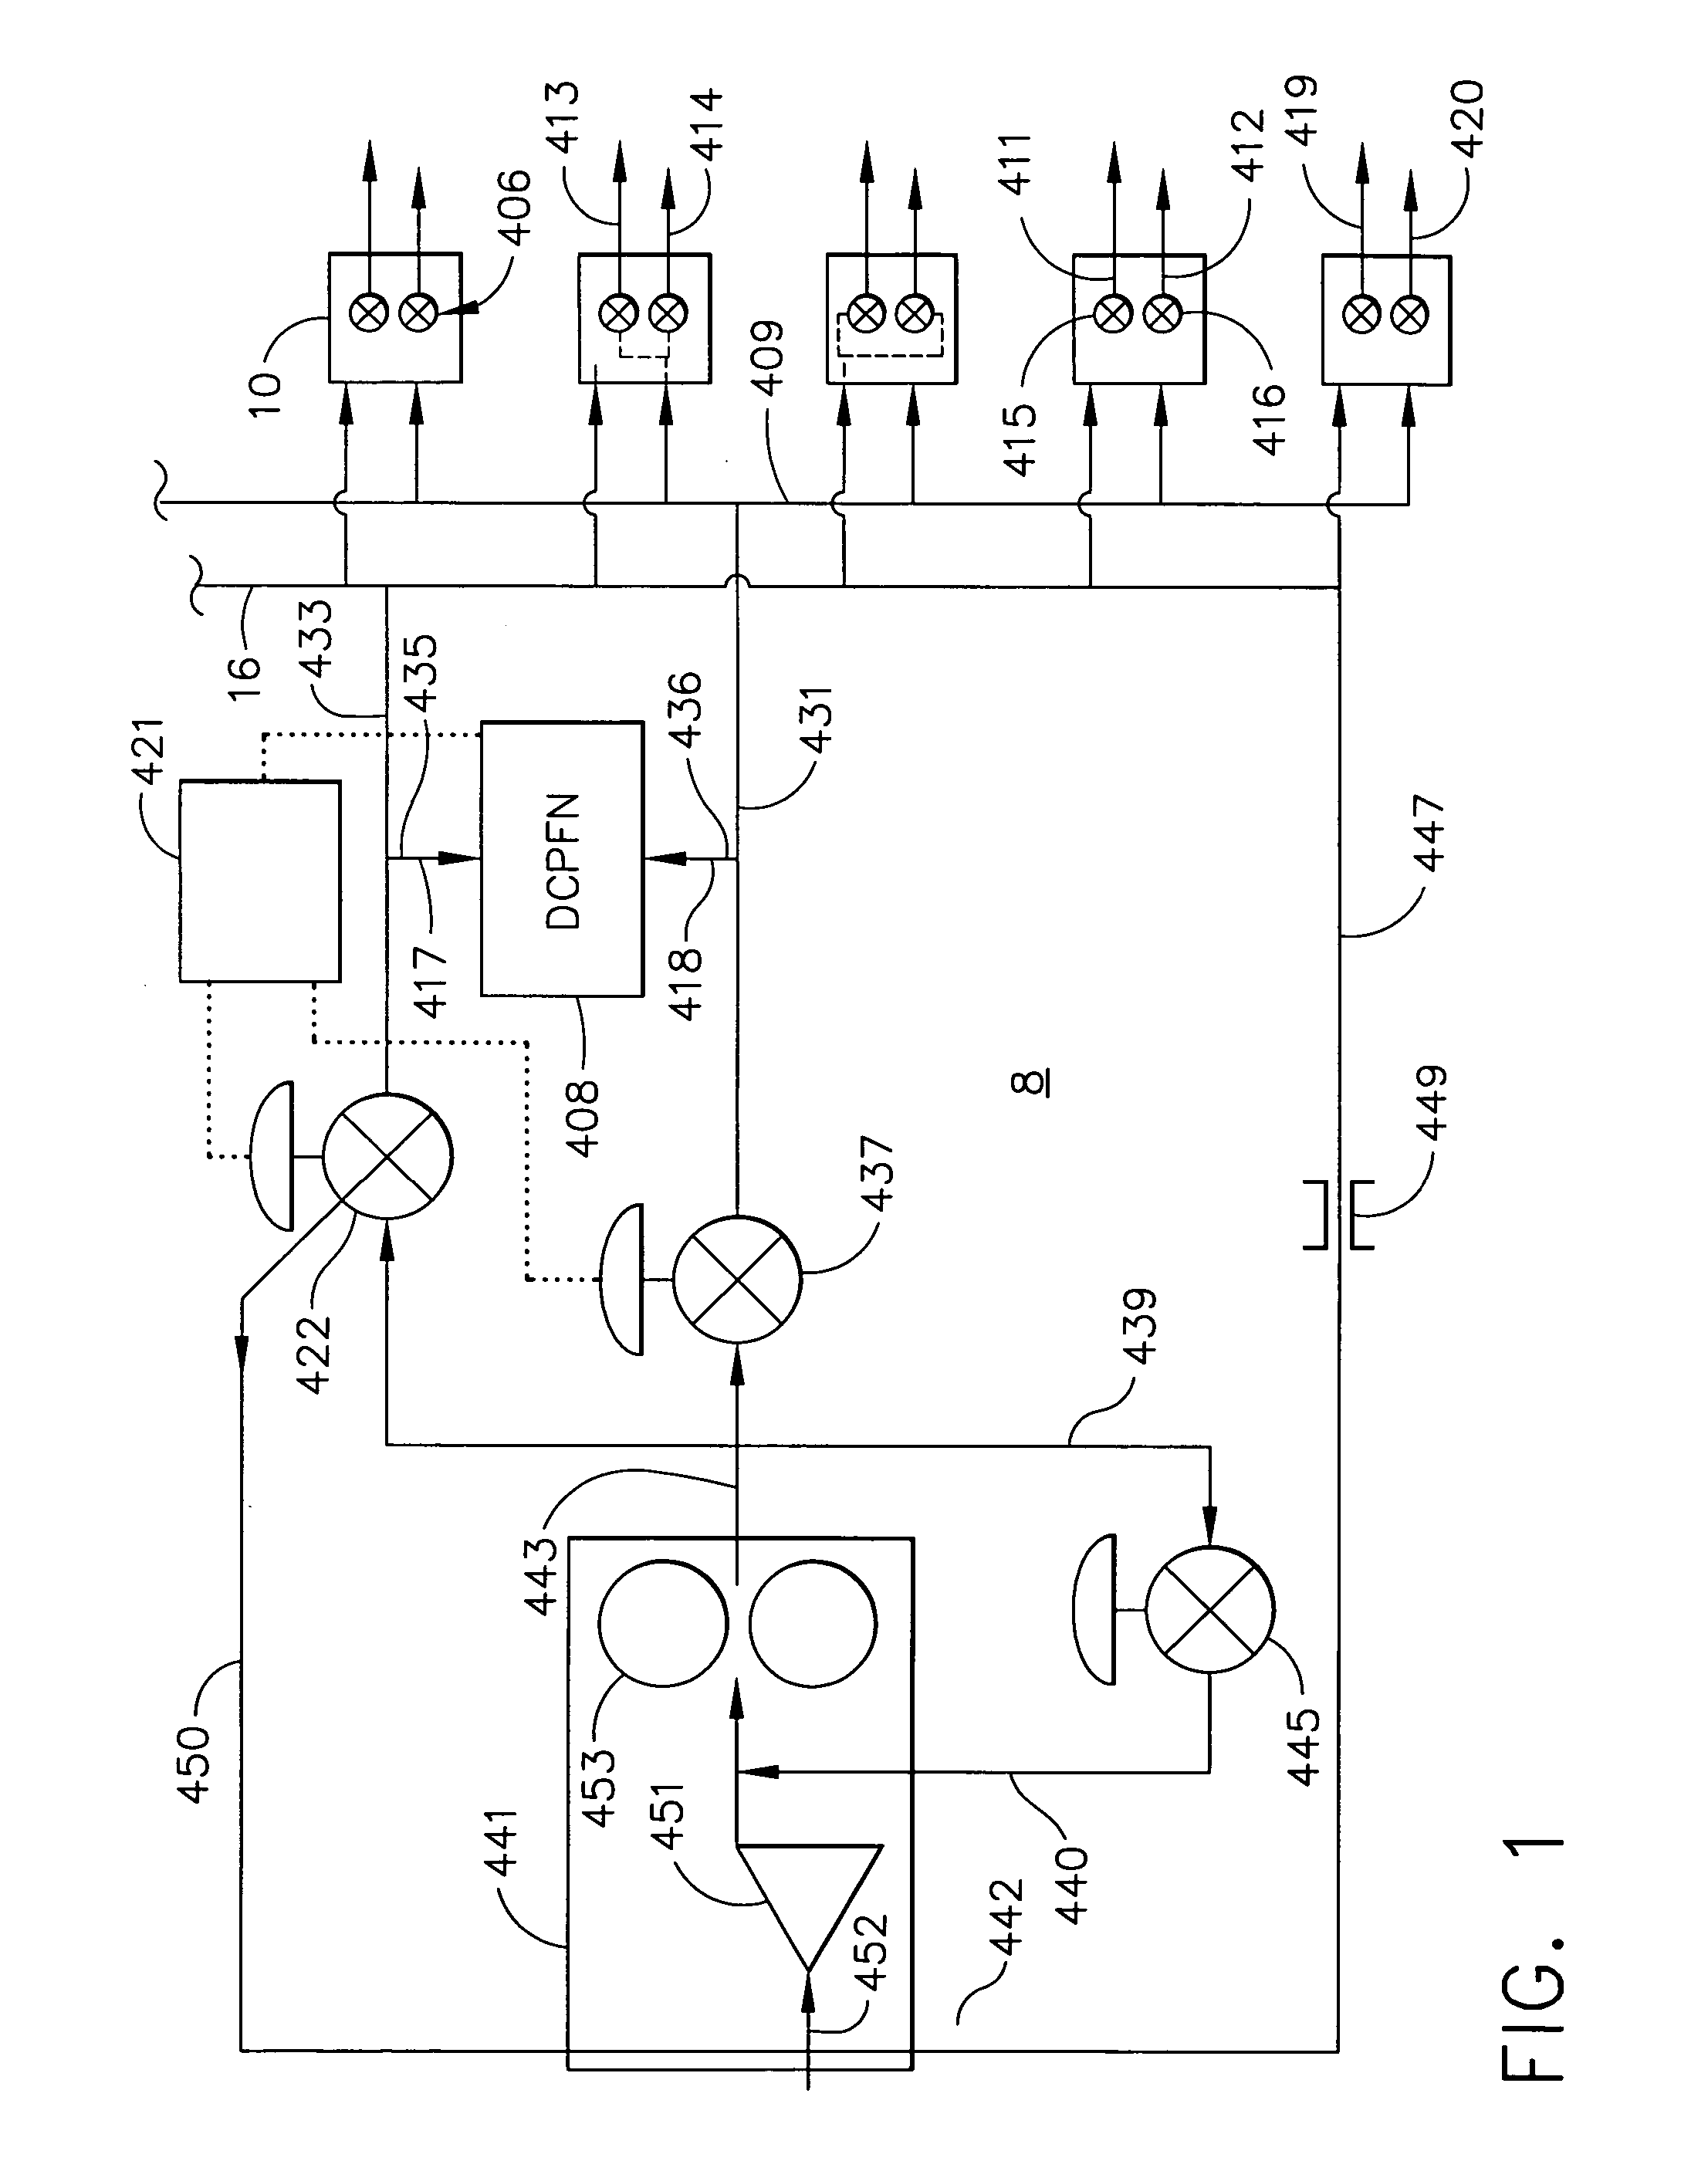 Controlled pressure fuel nozzle system